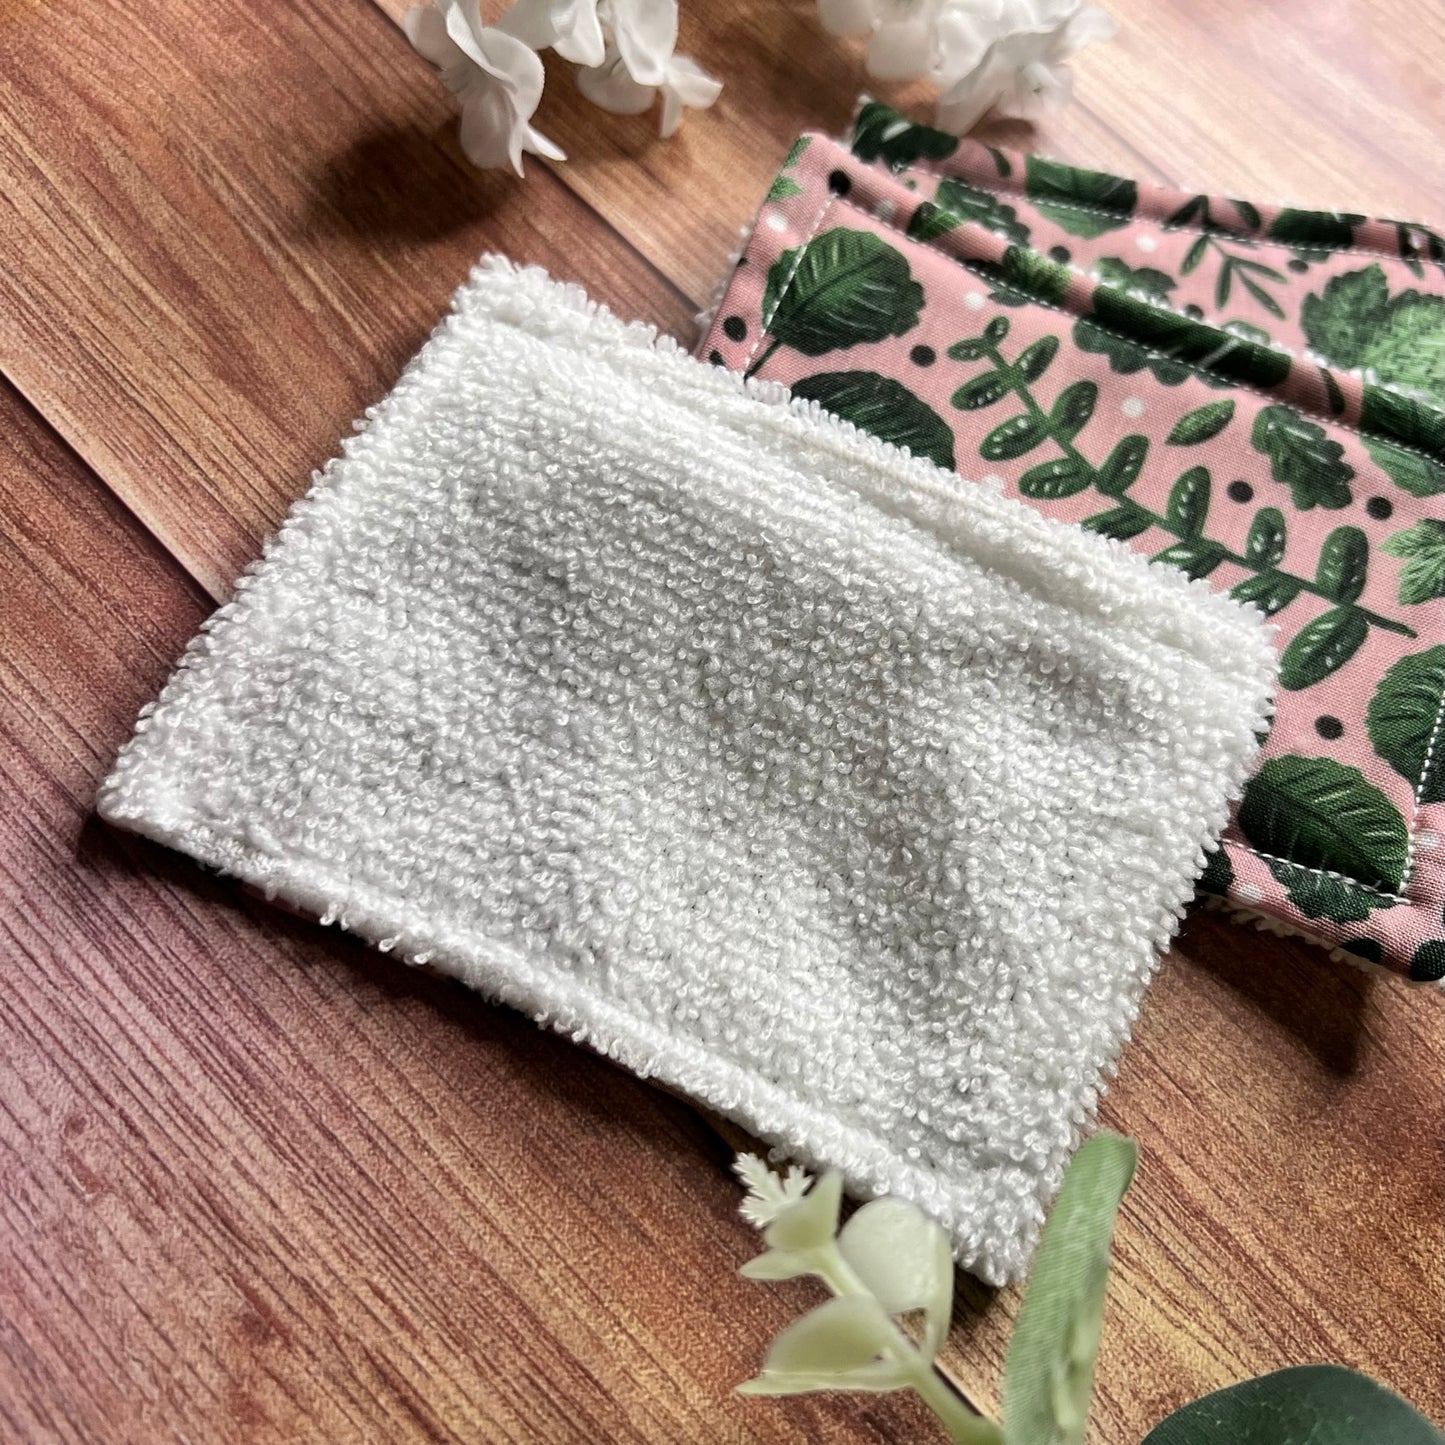 enjoy textured towelling on these exfoliating pads, as an eco friendly alternative to cotton pads. These make a great handmade gift for mom too.